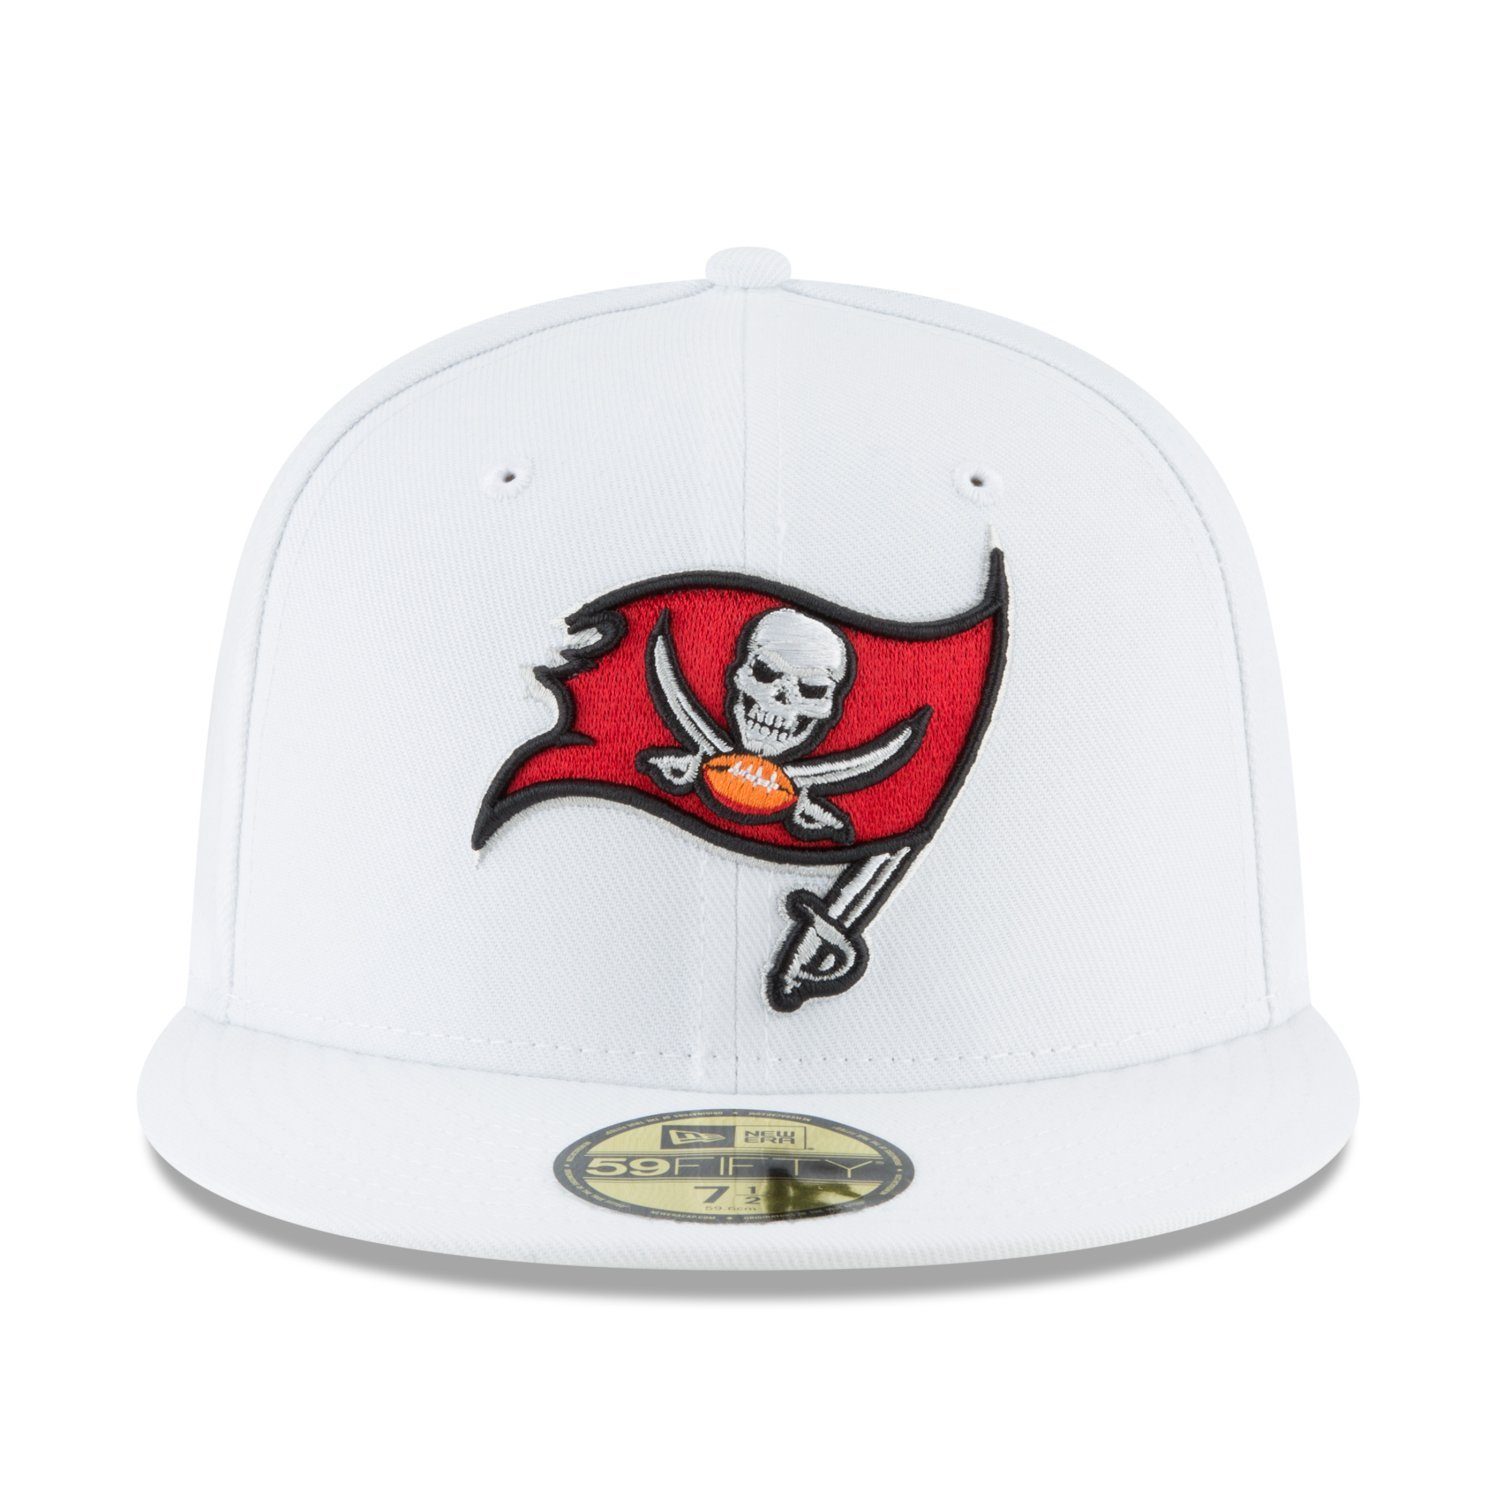 Bay Era Fitted 59Fifty Buccaneers New Tampa NFL Cap